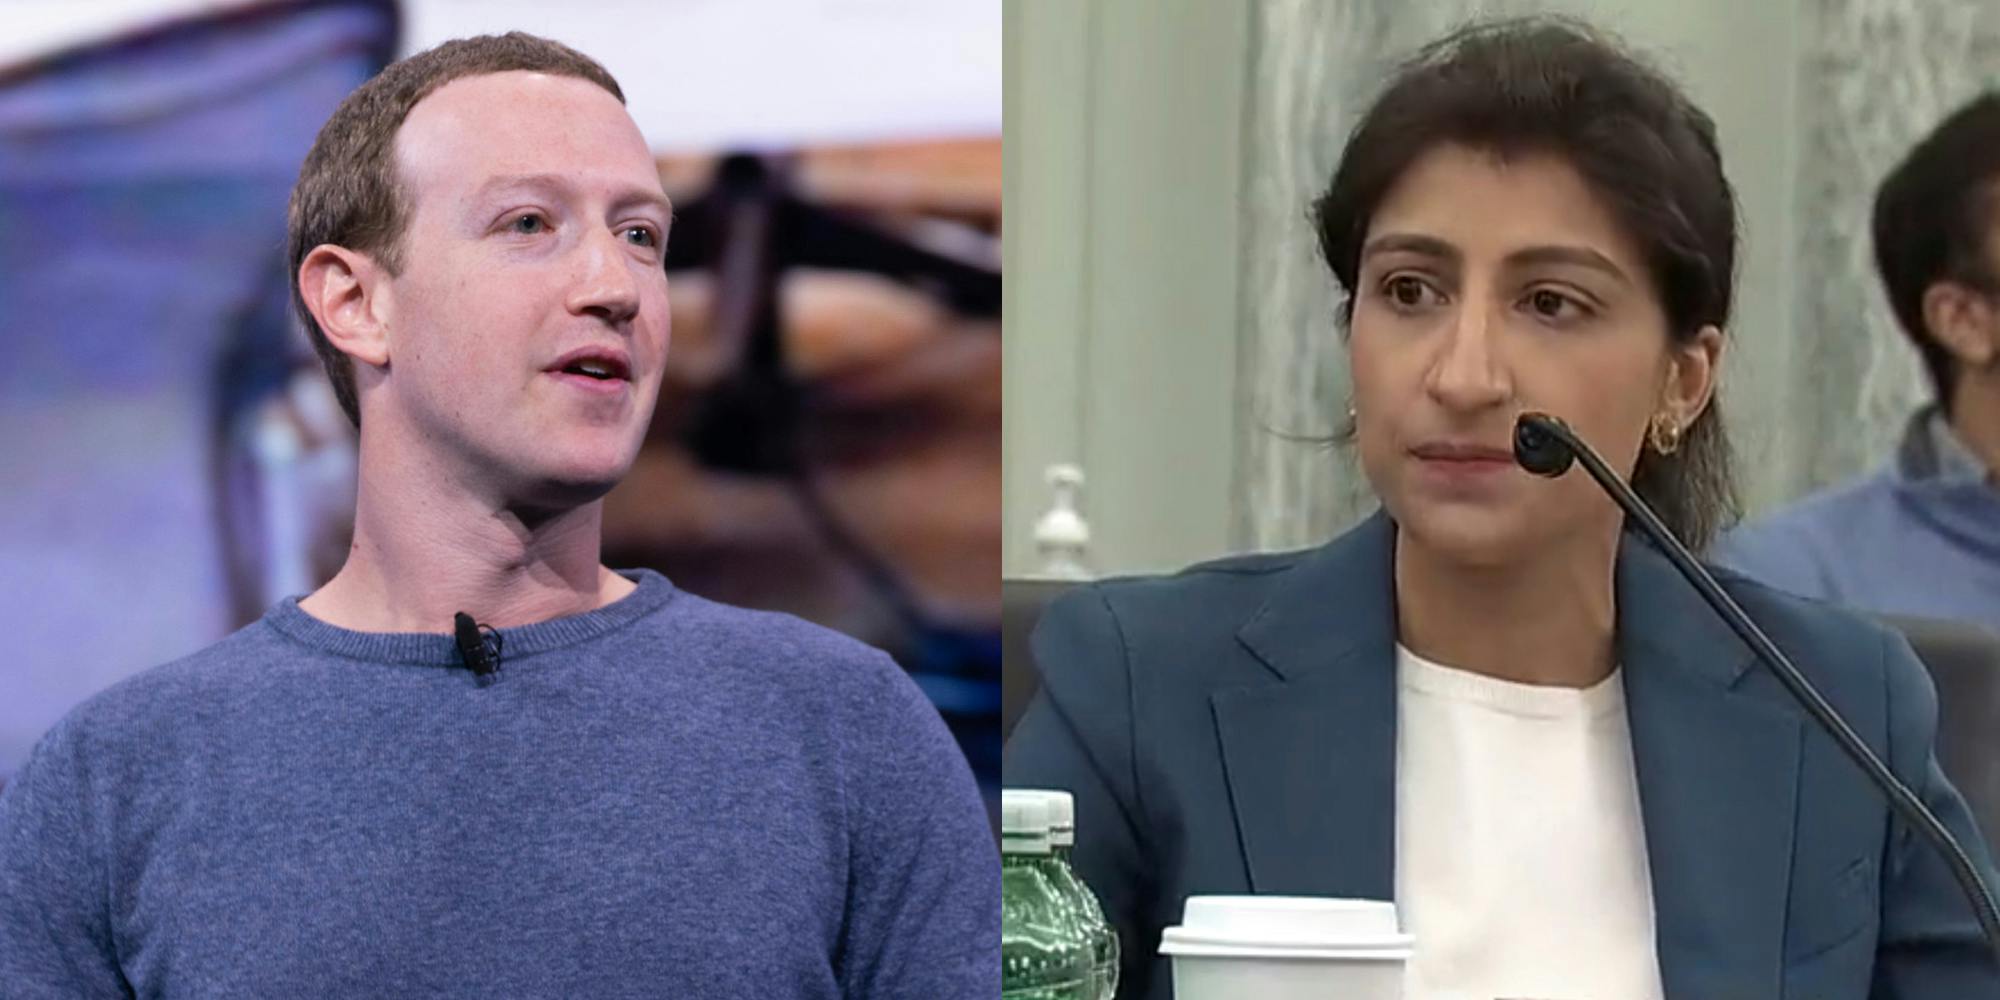 A side by side of Facebook CEO Mark Zuckerberg and FTC Chairwoman Lina Khan.